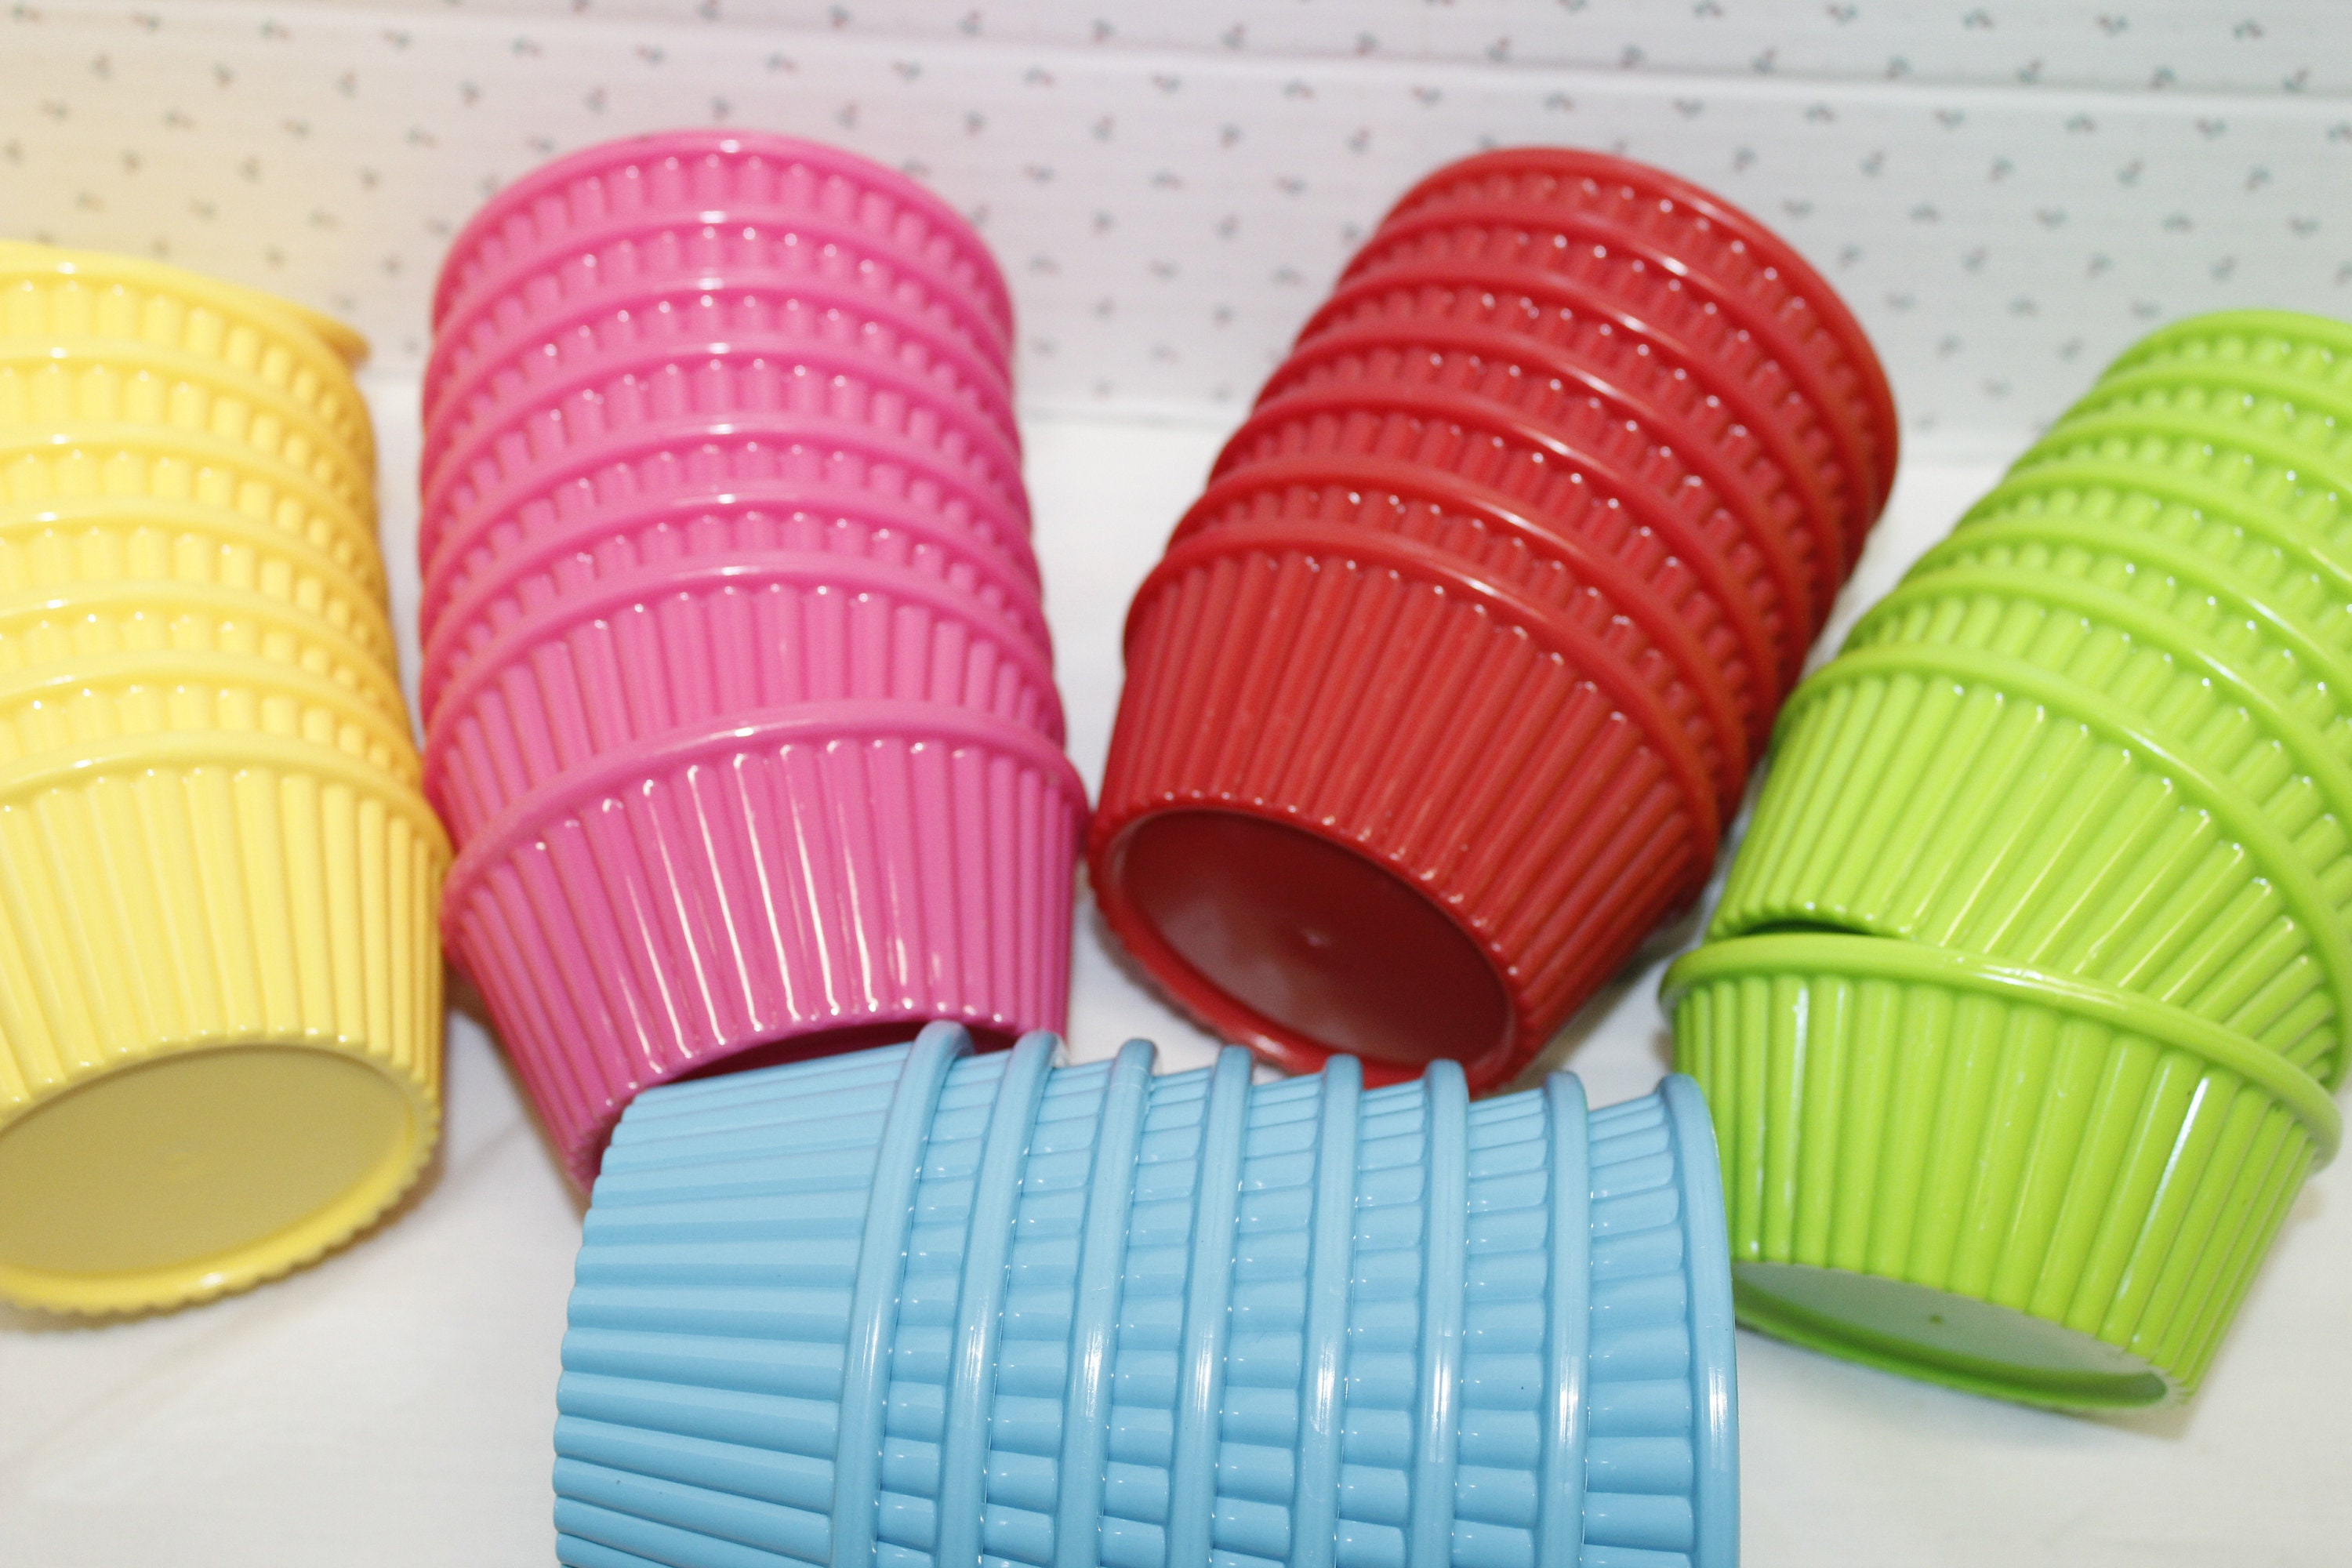 Ribbed Plastic Cups 